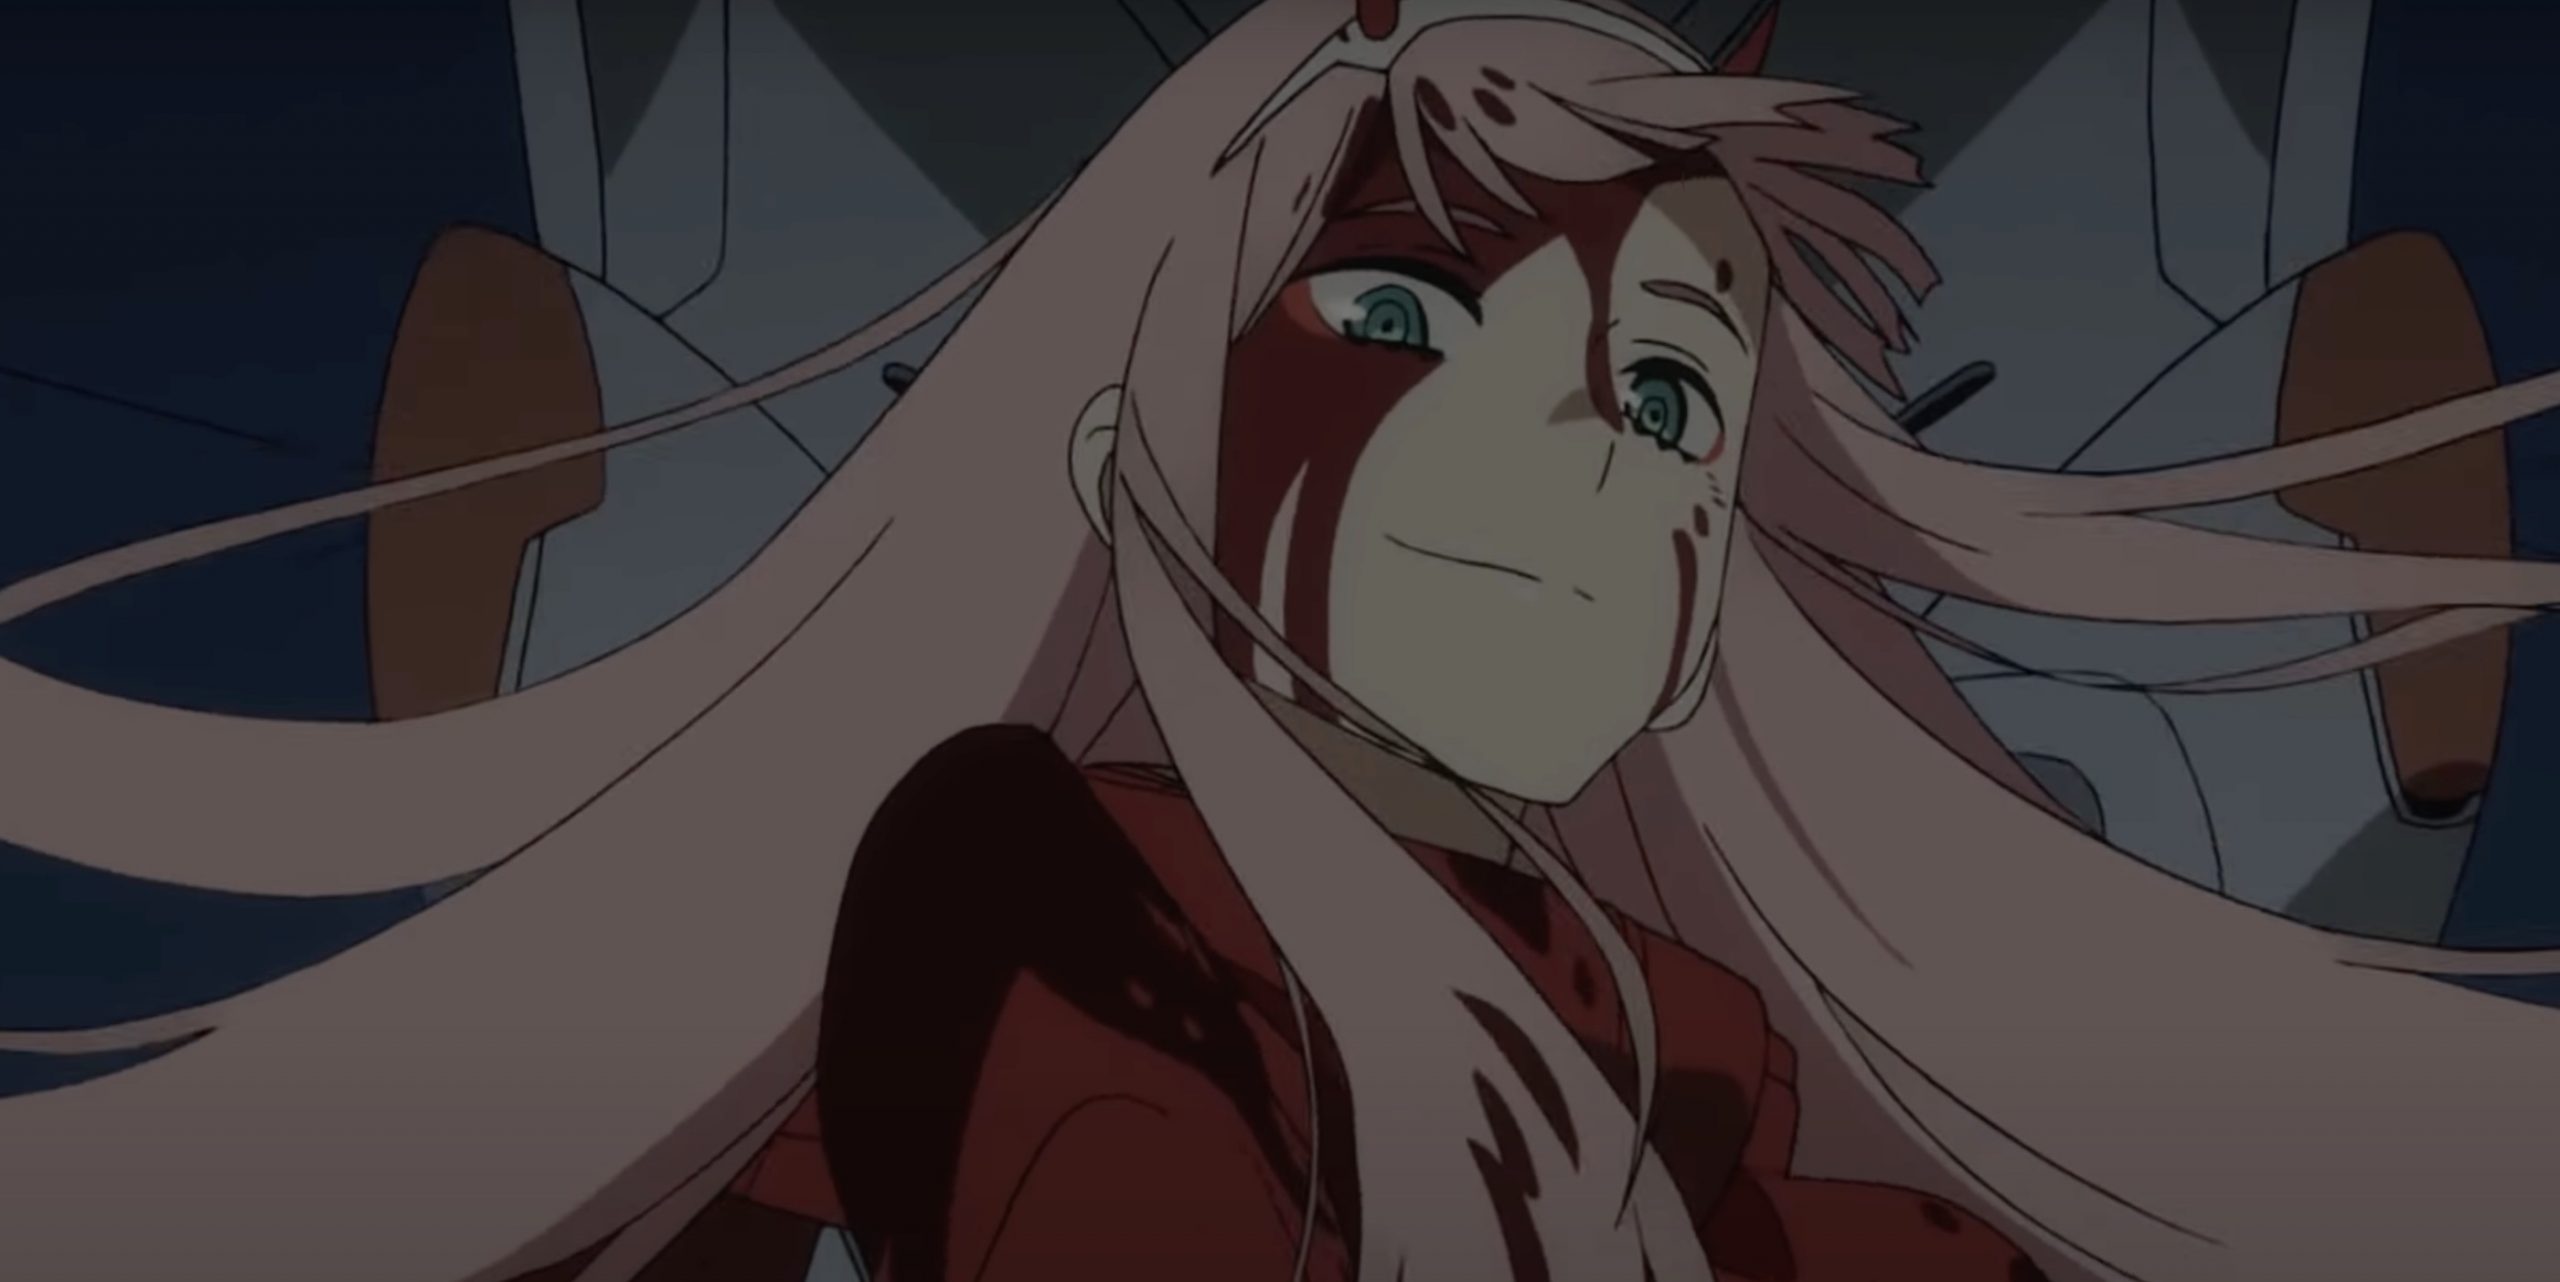 Why Darling in the Franxx Is So Hated? Explained